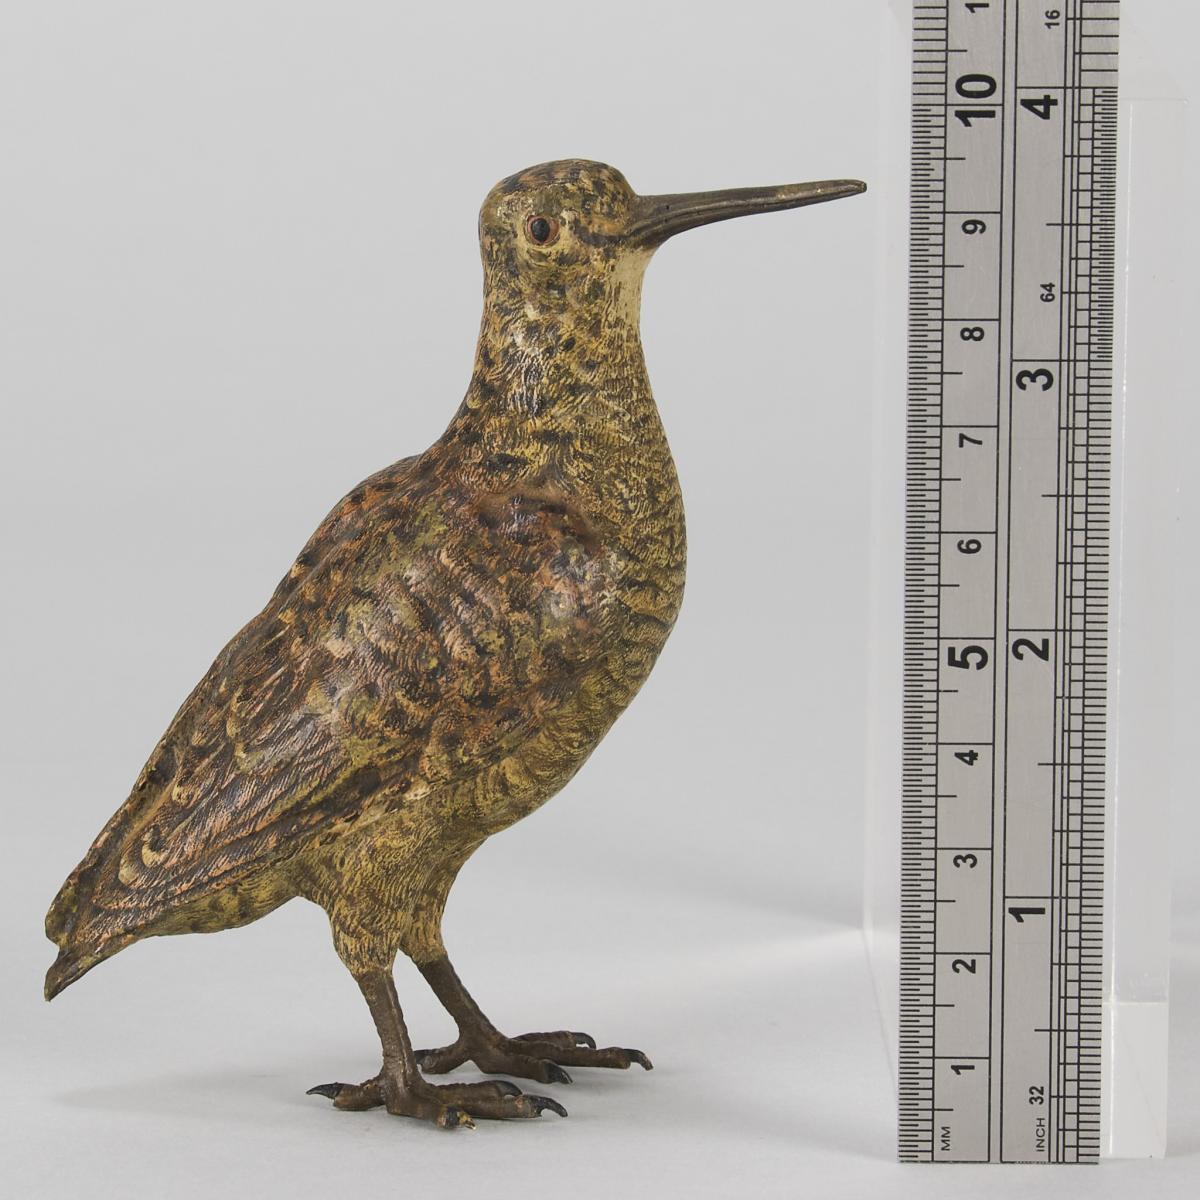 Early 20th Century Cold-Painted Bronze entitled "Woodcock" by Franz Bergman